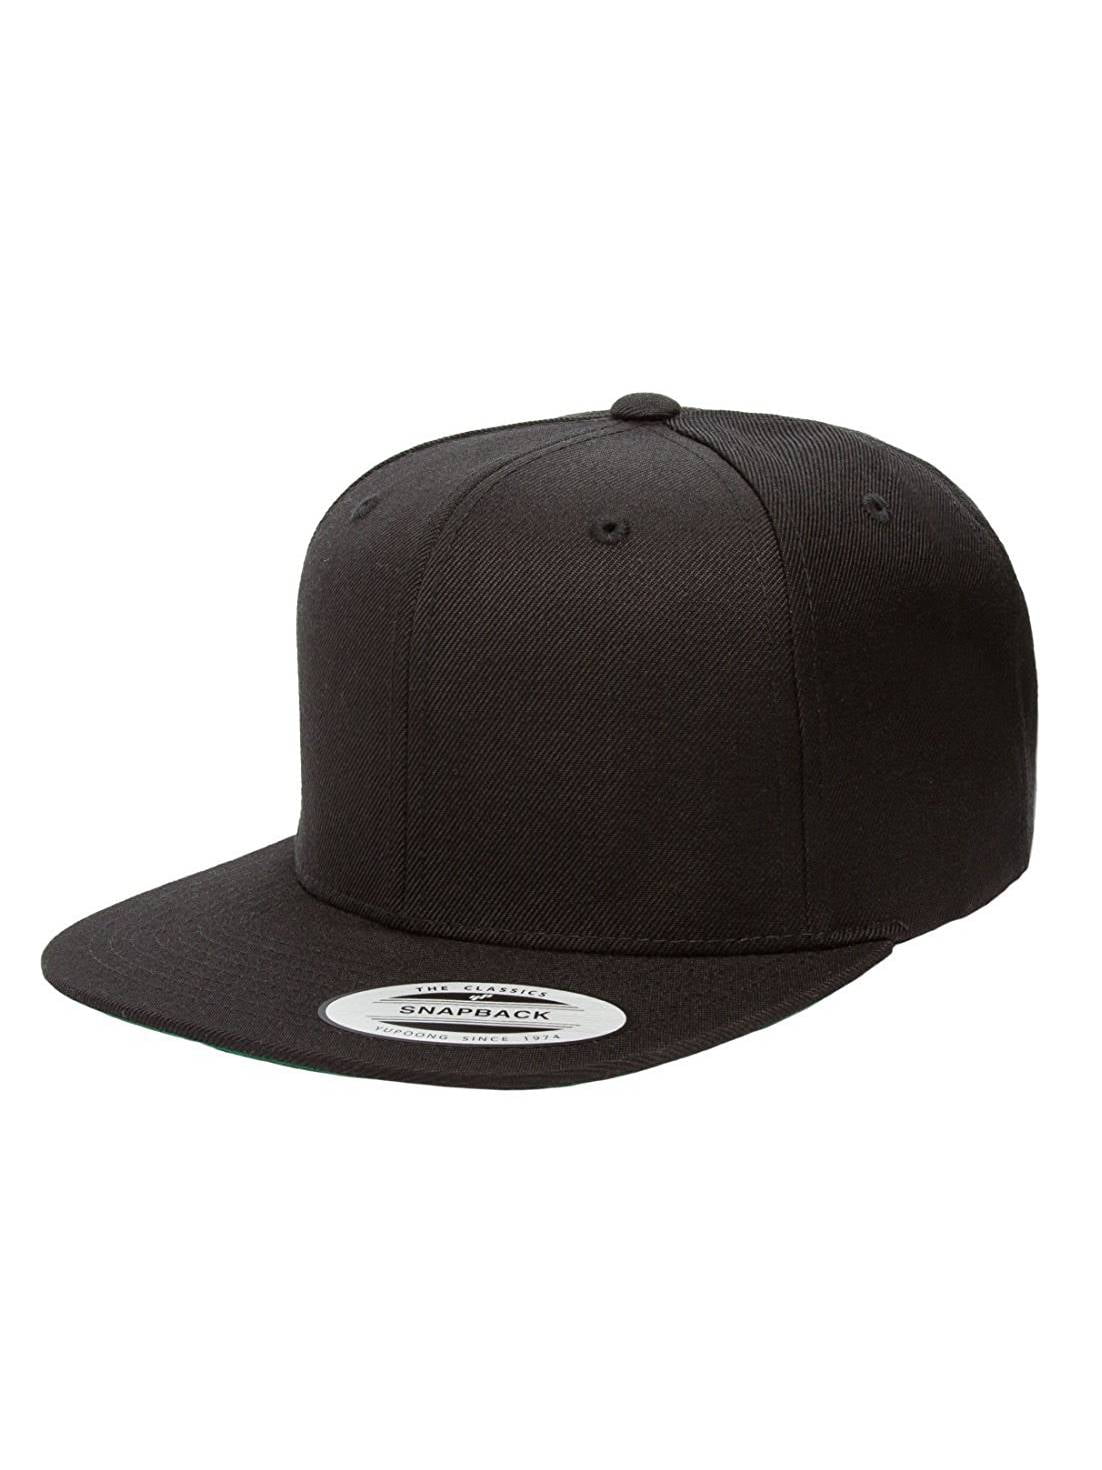 Yupoong Classic Style 6-Panel 2-Tone Snapback Cap, Black/Red